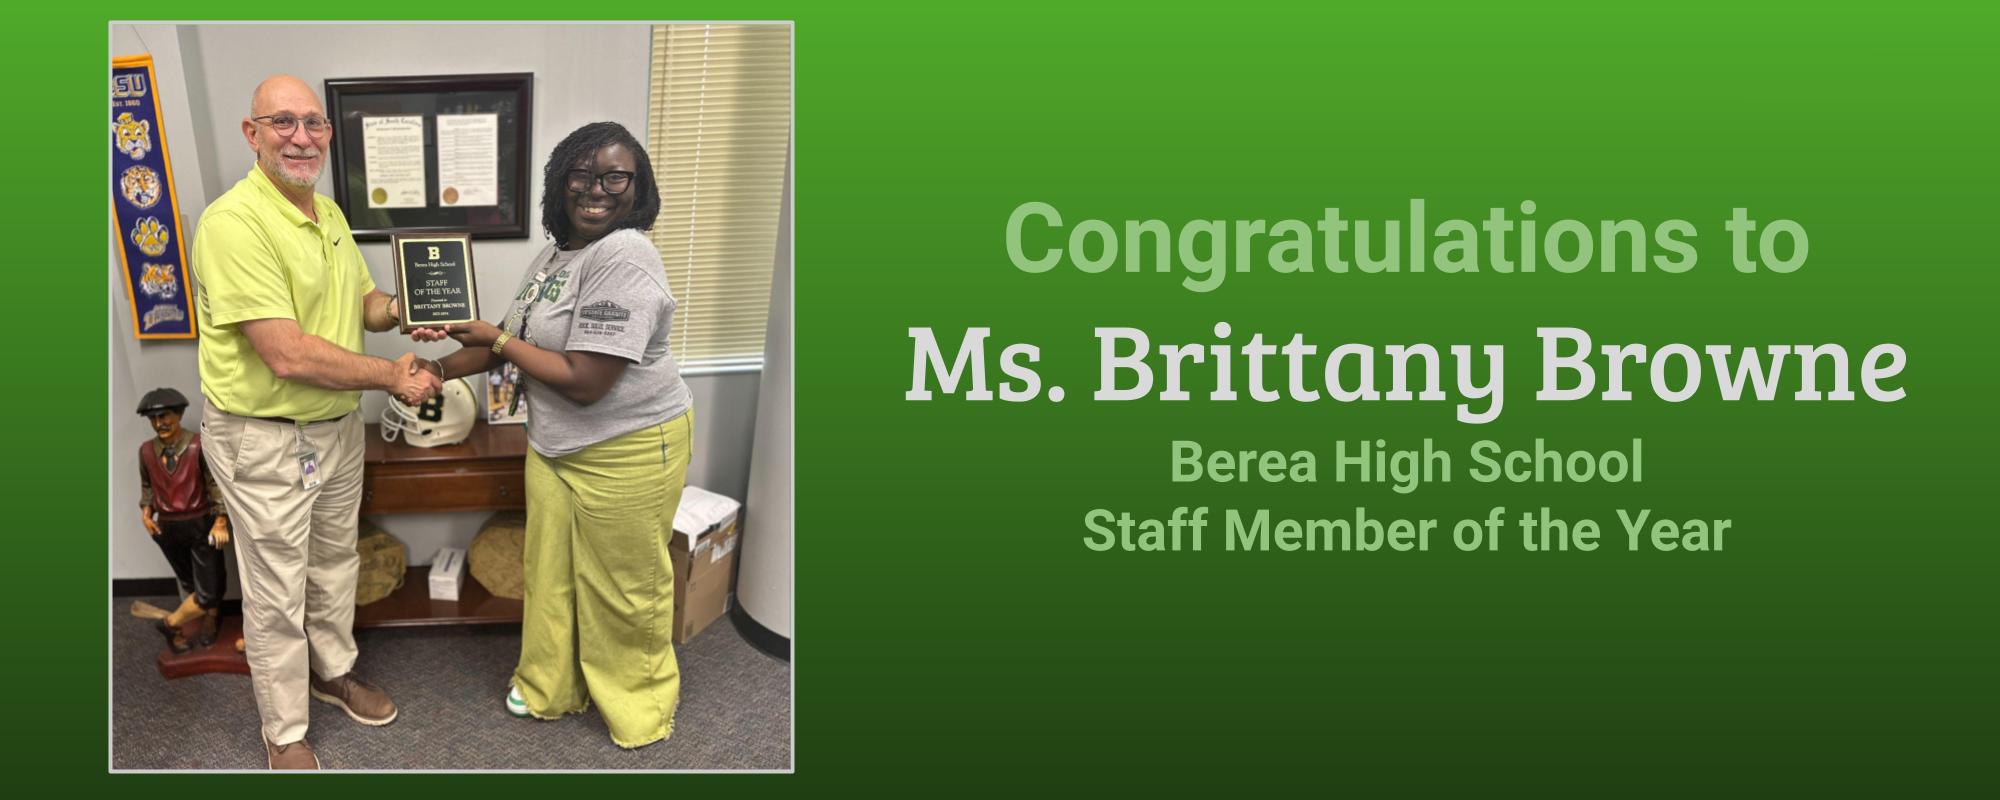 Brittany Browne staff member of the year